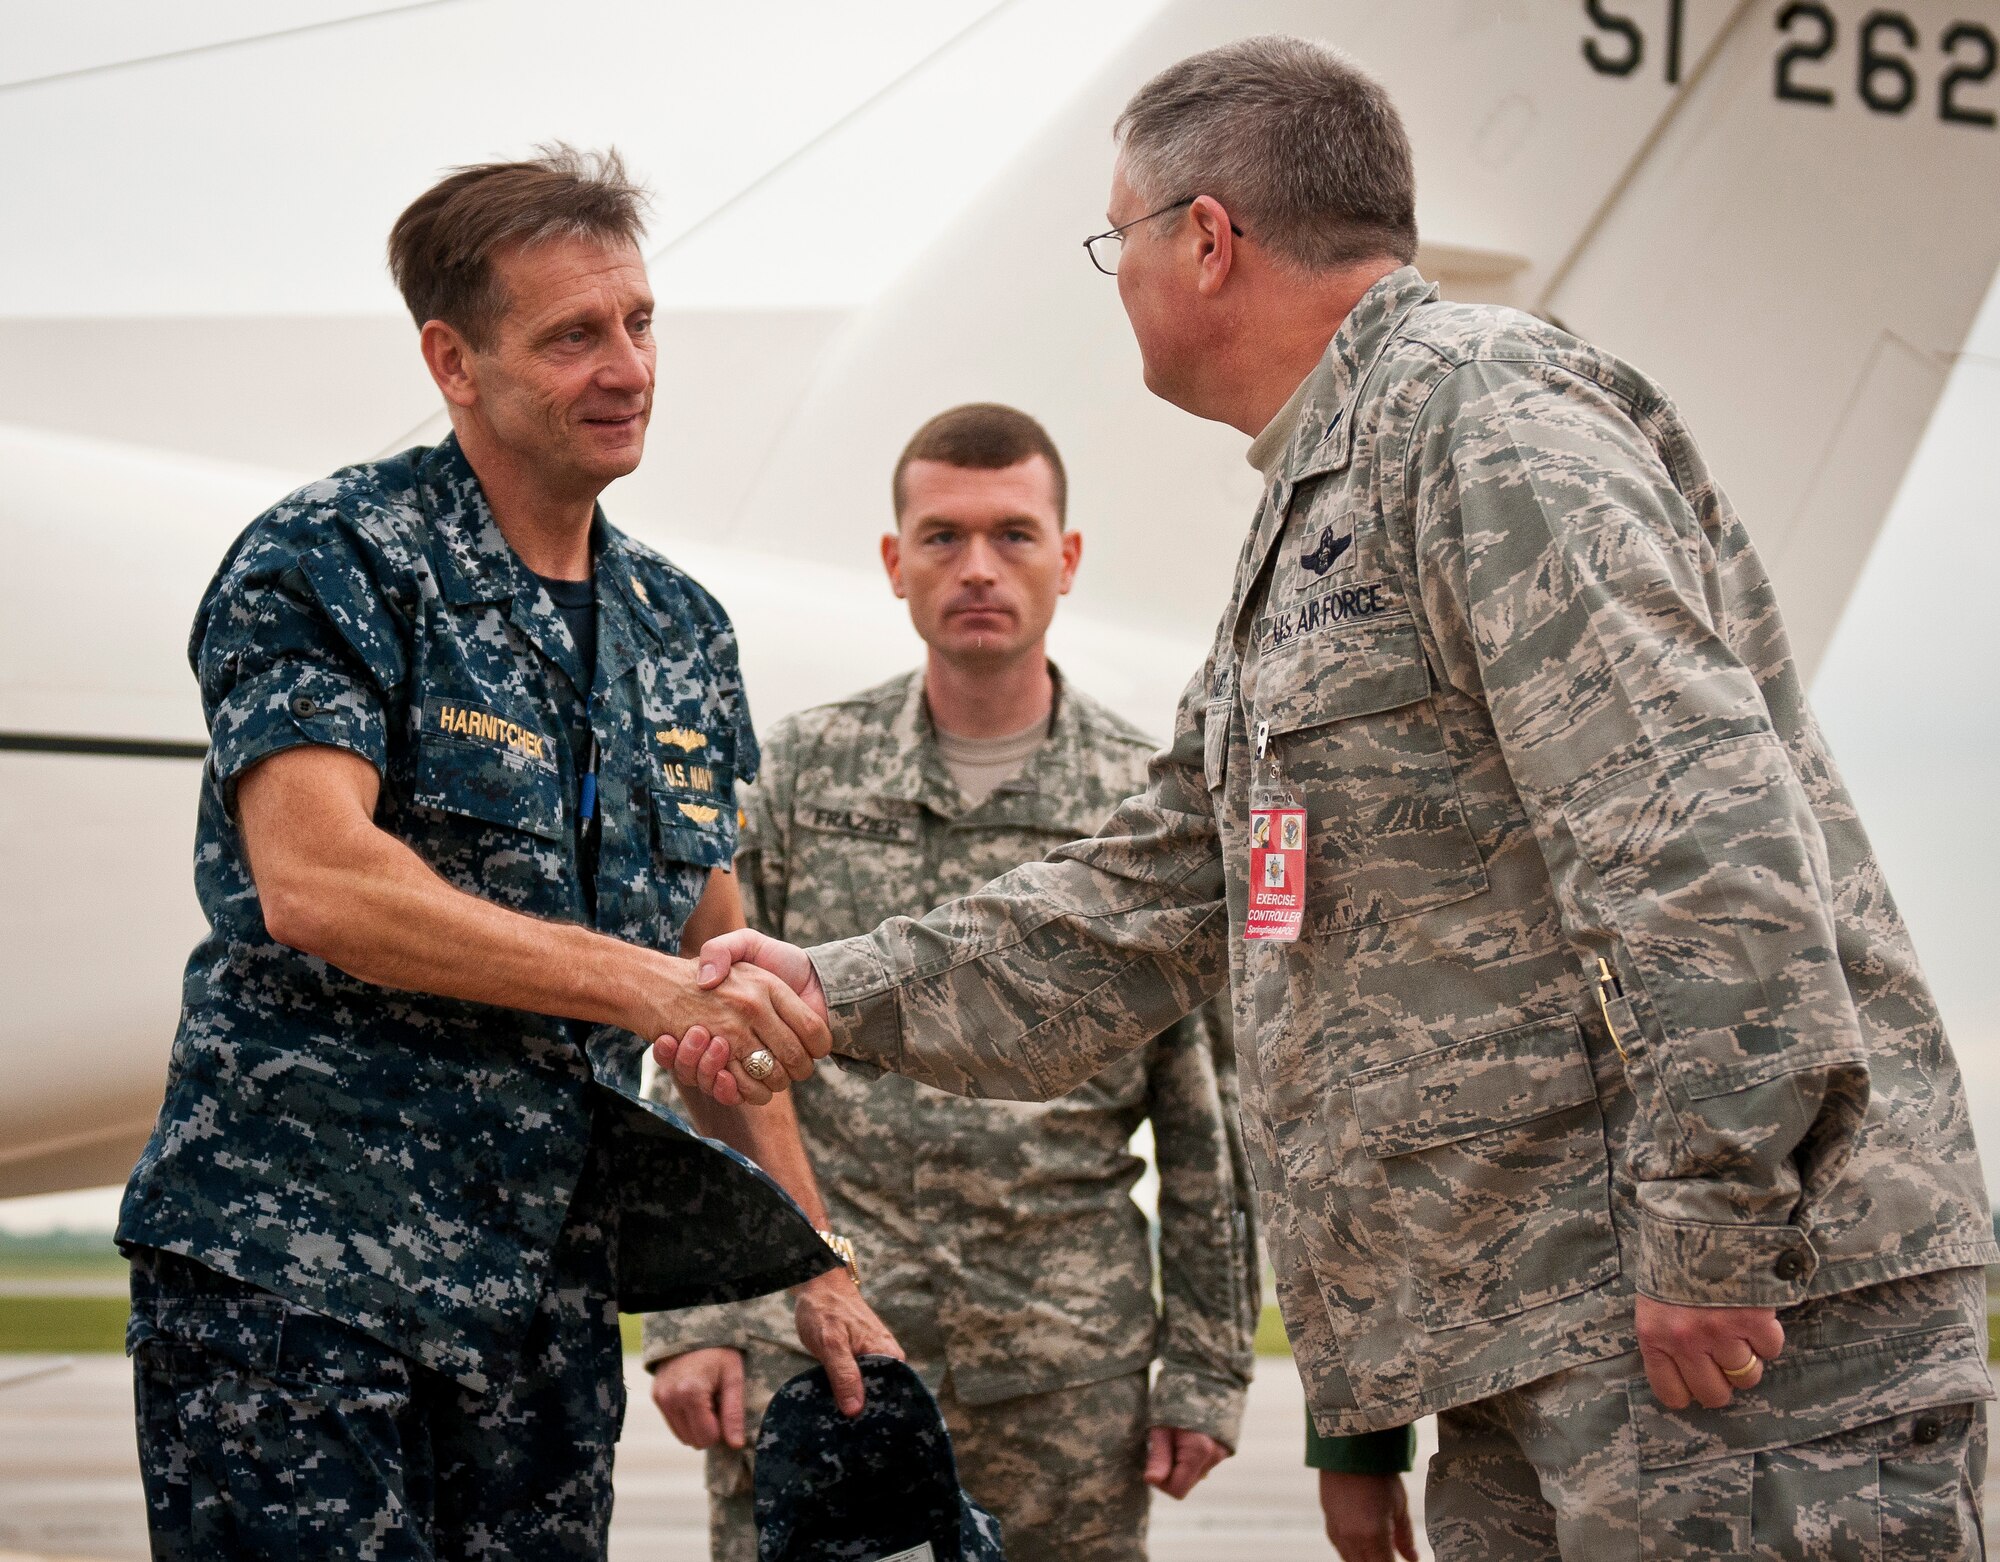 Lt. Col. David Mounkes (right), commander of the Kentucky Air National Guard’s 123rd Contingency Response Element, greets Vice Adm. Mark D. Harnitchek, deputy commander of United States Transportation Command, as he arrives at Springfield-Branson National Airport in Springfield, Mo., on May 19, 2011. Admiral Harnitchek was on hand for a news conference on National Level Exercise 2011, a weeklong training scenario involving a massive earthquake along the New Madrid fault line requiring extensive aeromedical evacuation of injured patients. The Kentucky Air National Guard's 123rd Contingency Response Element was responsible for establishing an initial-response air hub in Springfield during the exercise. (U.S. Air Force photo by Senior Airman Maxwell Rechel)